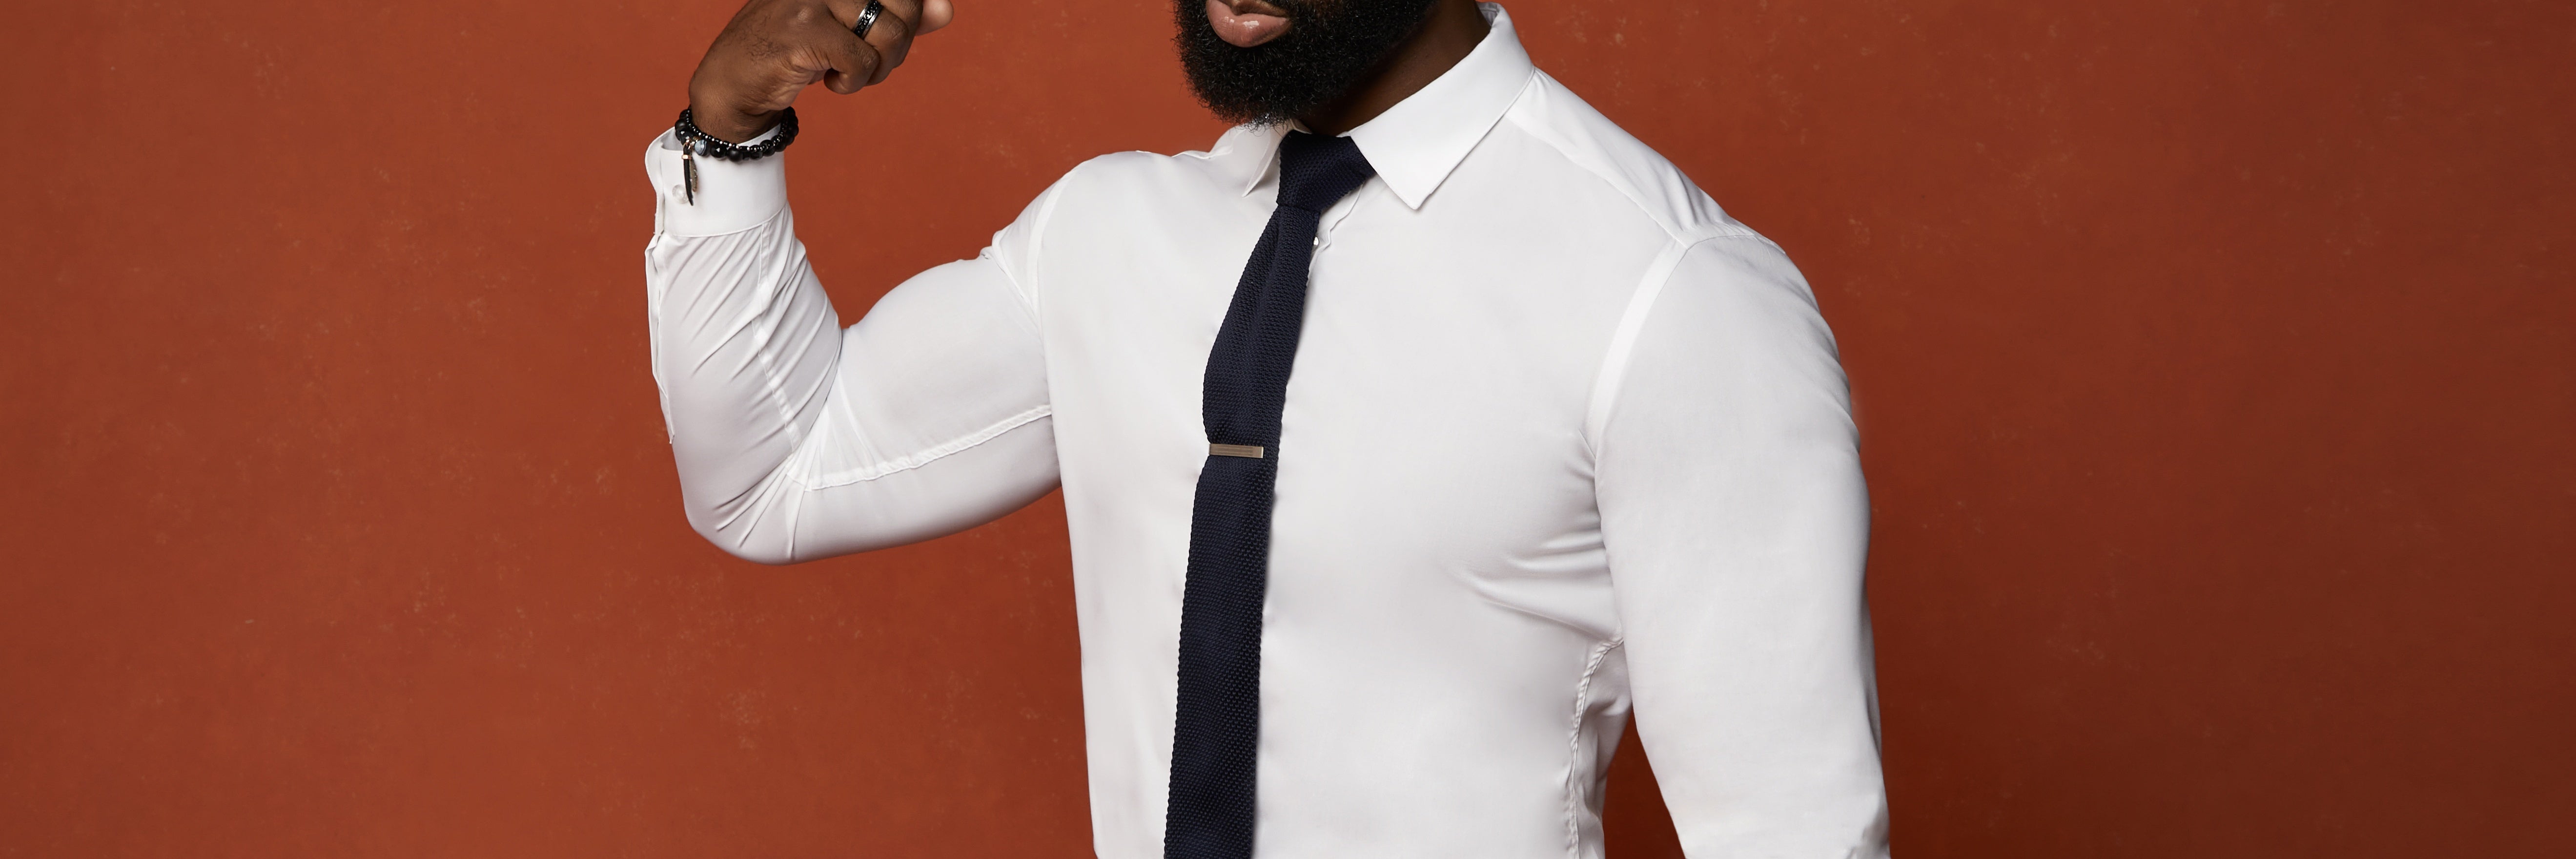 athletic fit vs slim fit shirt. White athletic fit shirt by Tapered Menswear